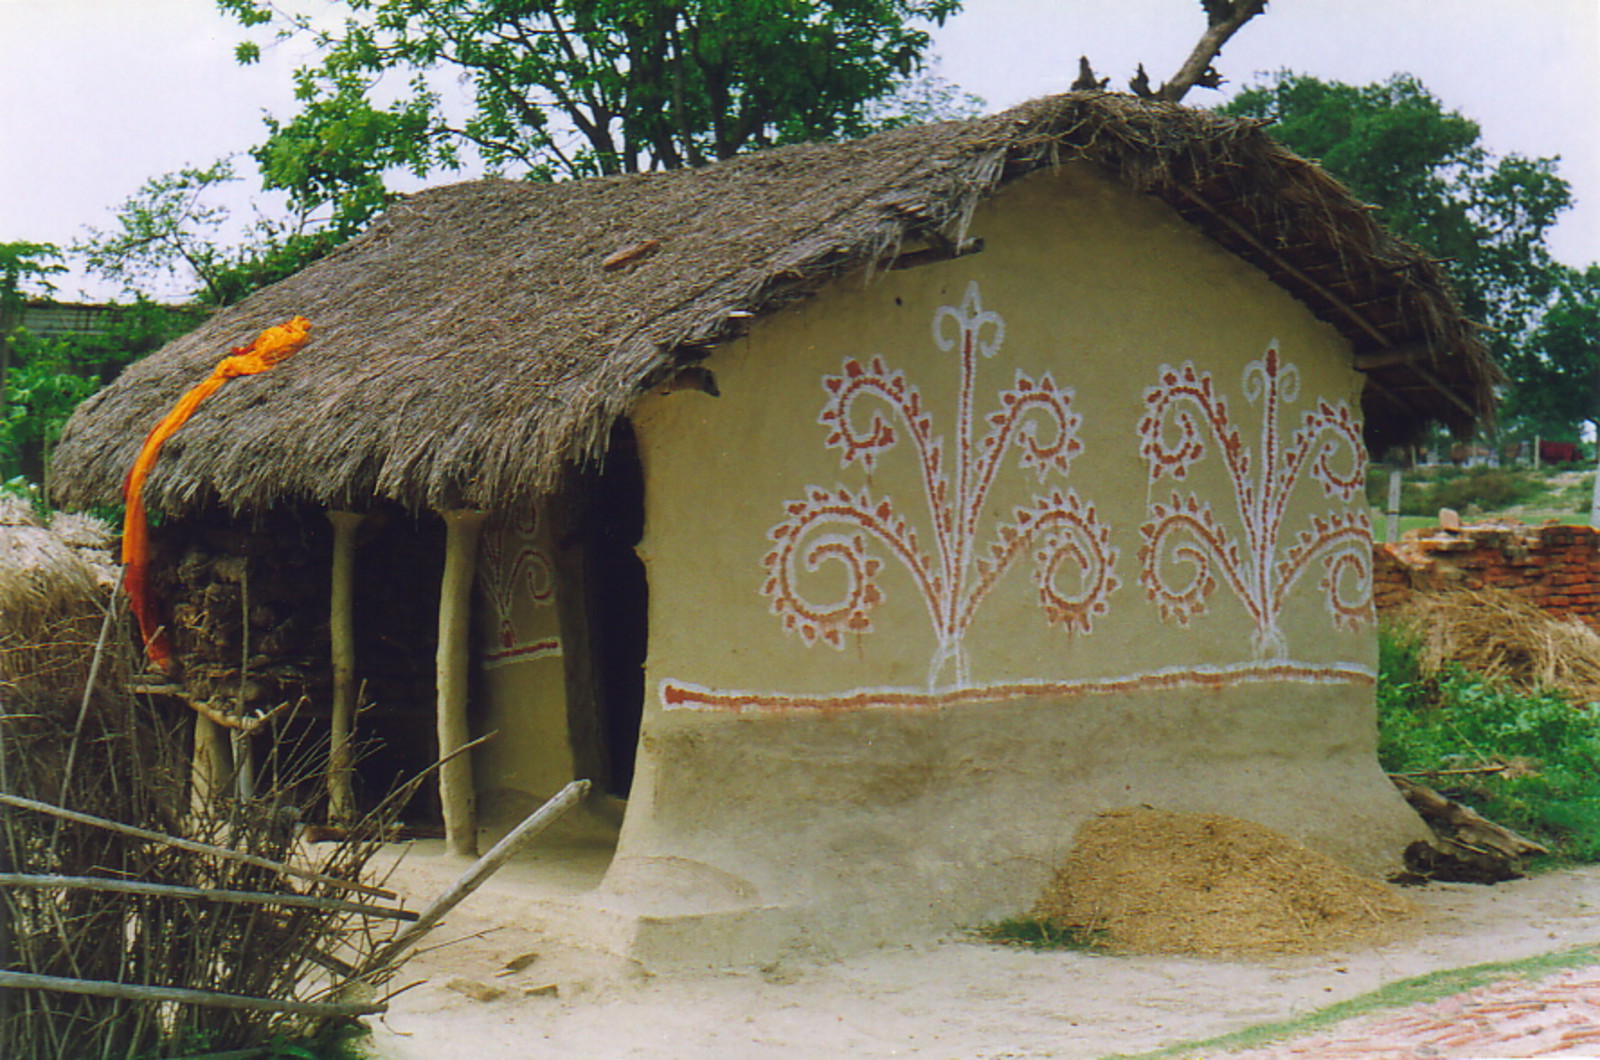 A beautifully decorated mud house